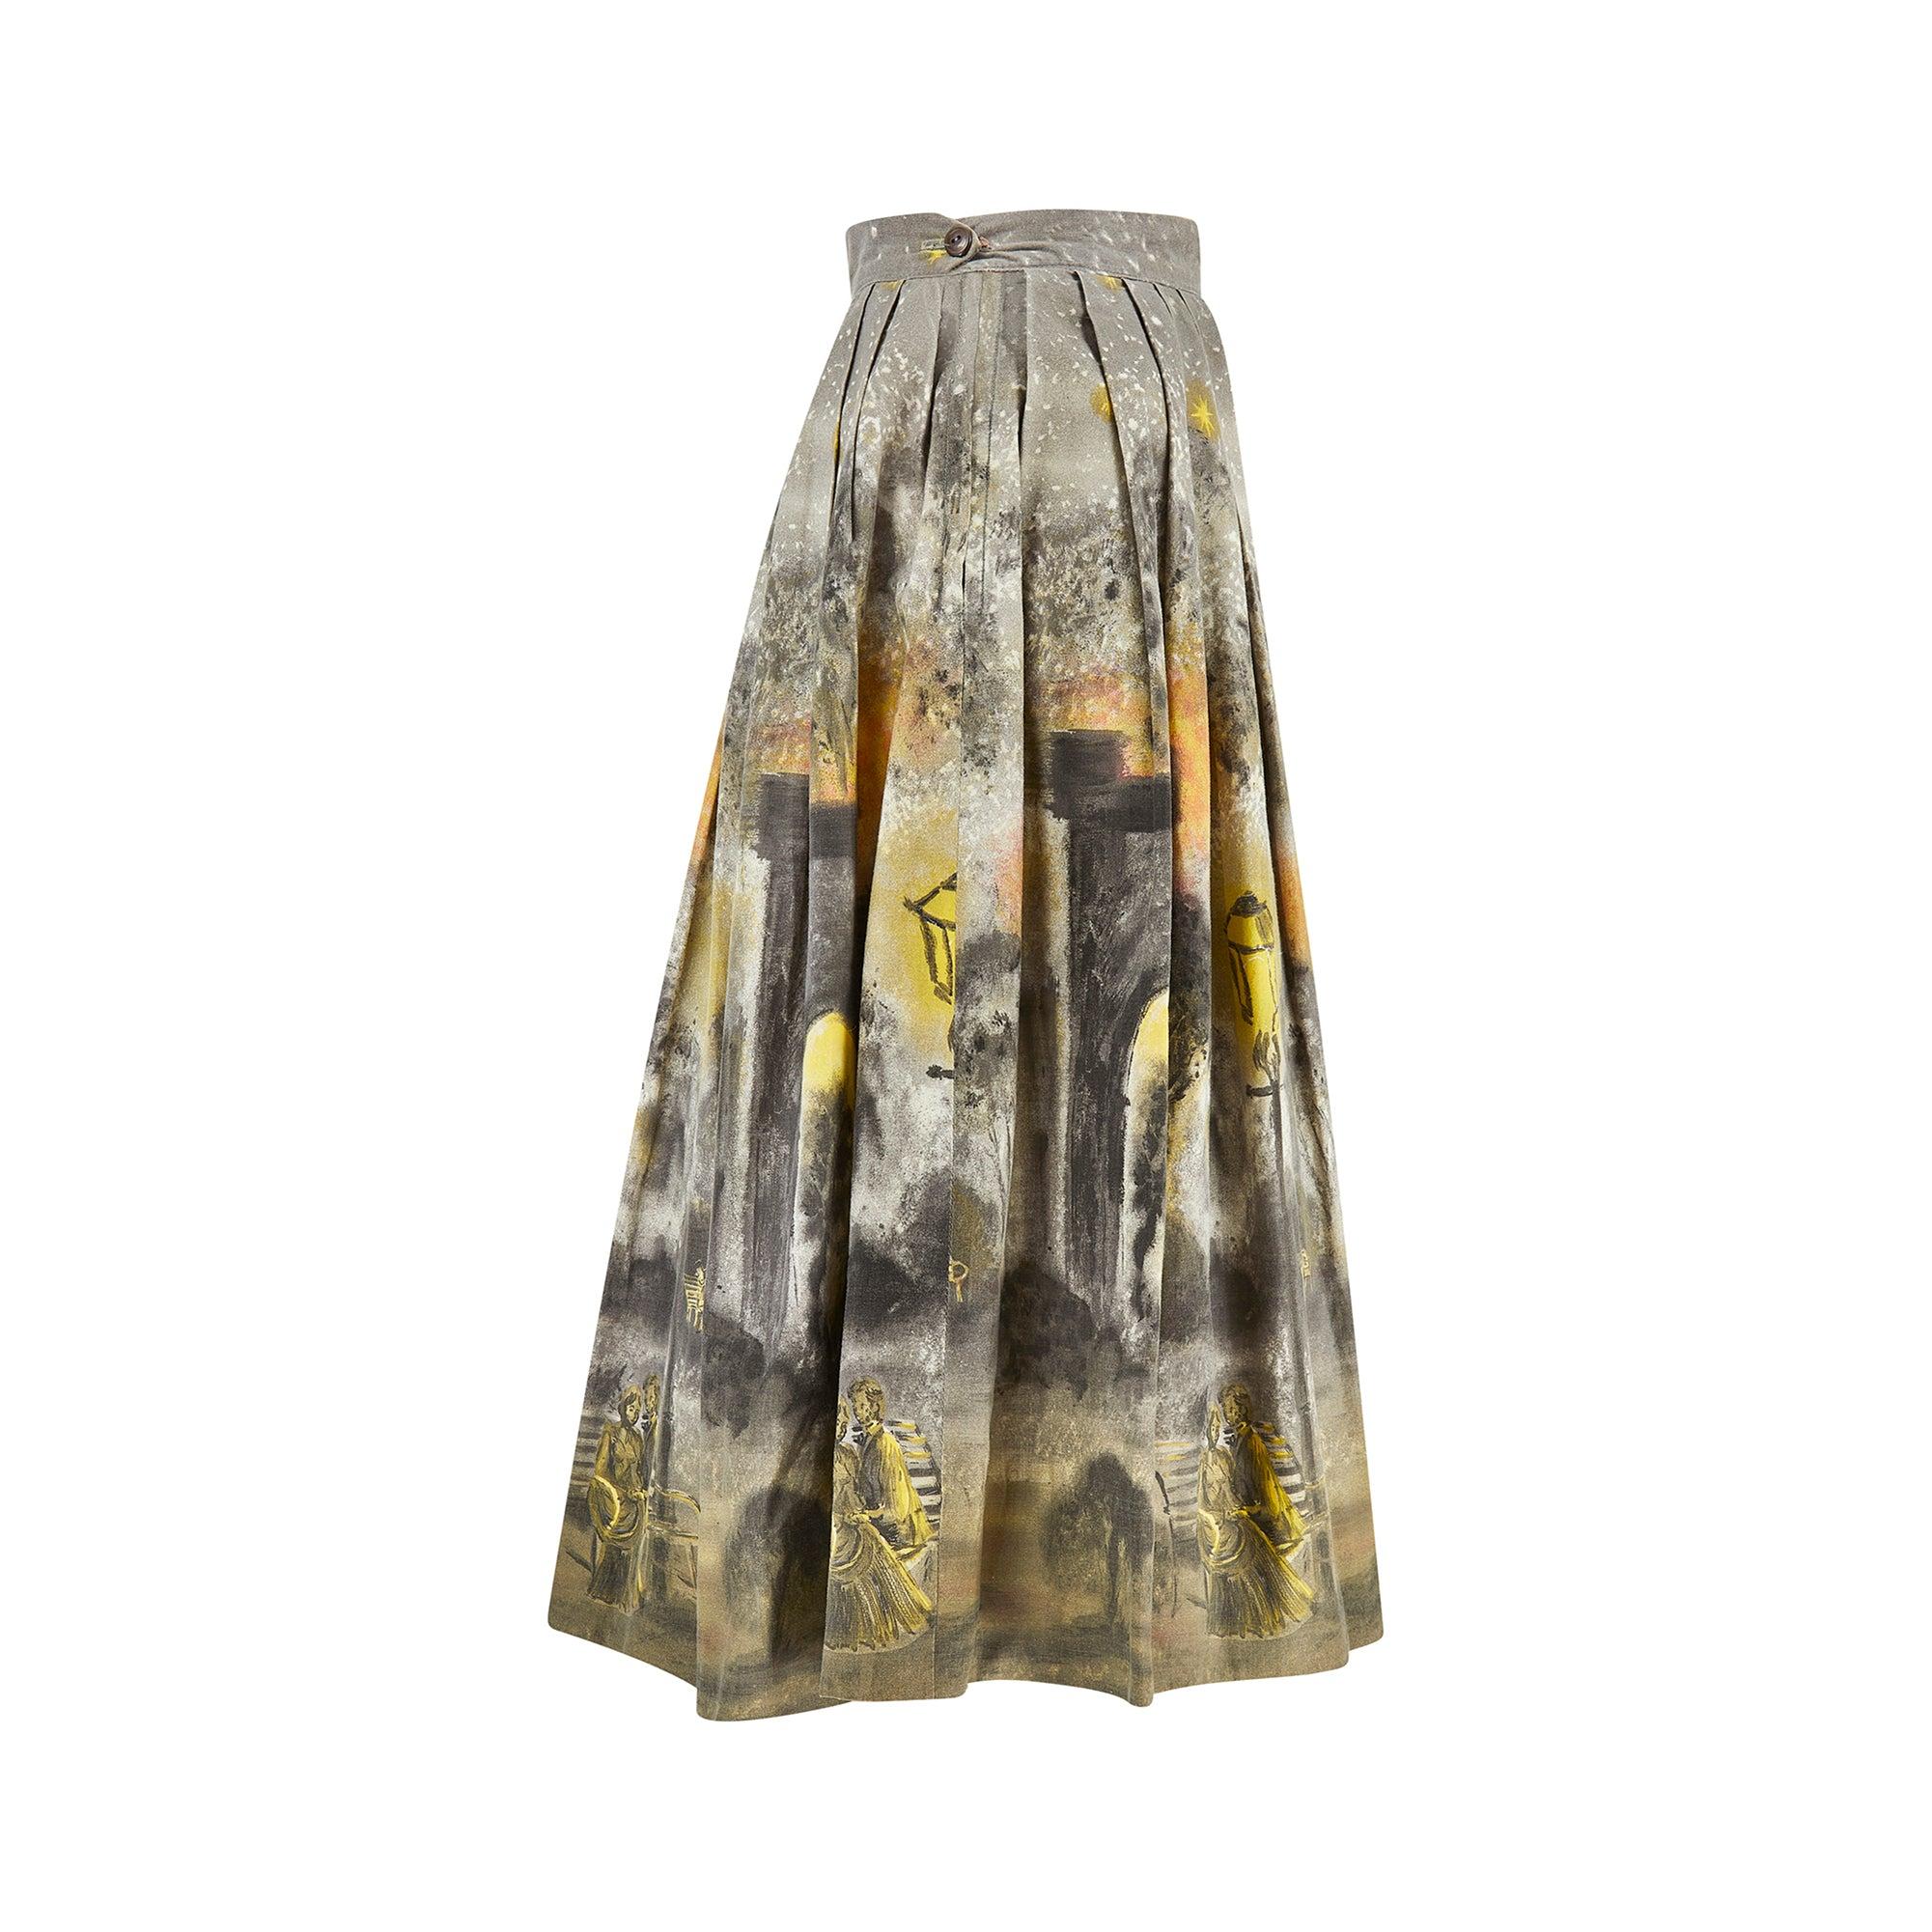 This unusual cotton skirt was manufactured in the 1950s by 'Lady Anne' and is tailored to a full-skirted, pleated style typical of this era. The skirt has the illusion of being hand-painted with a playful novelty print of a night time scene; we see